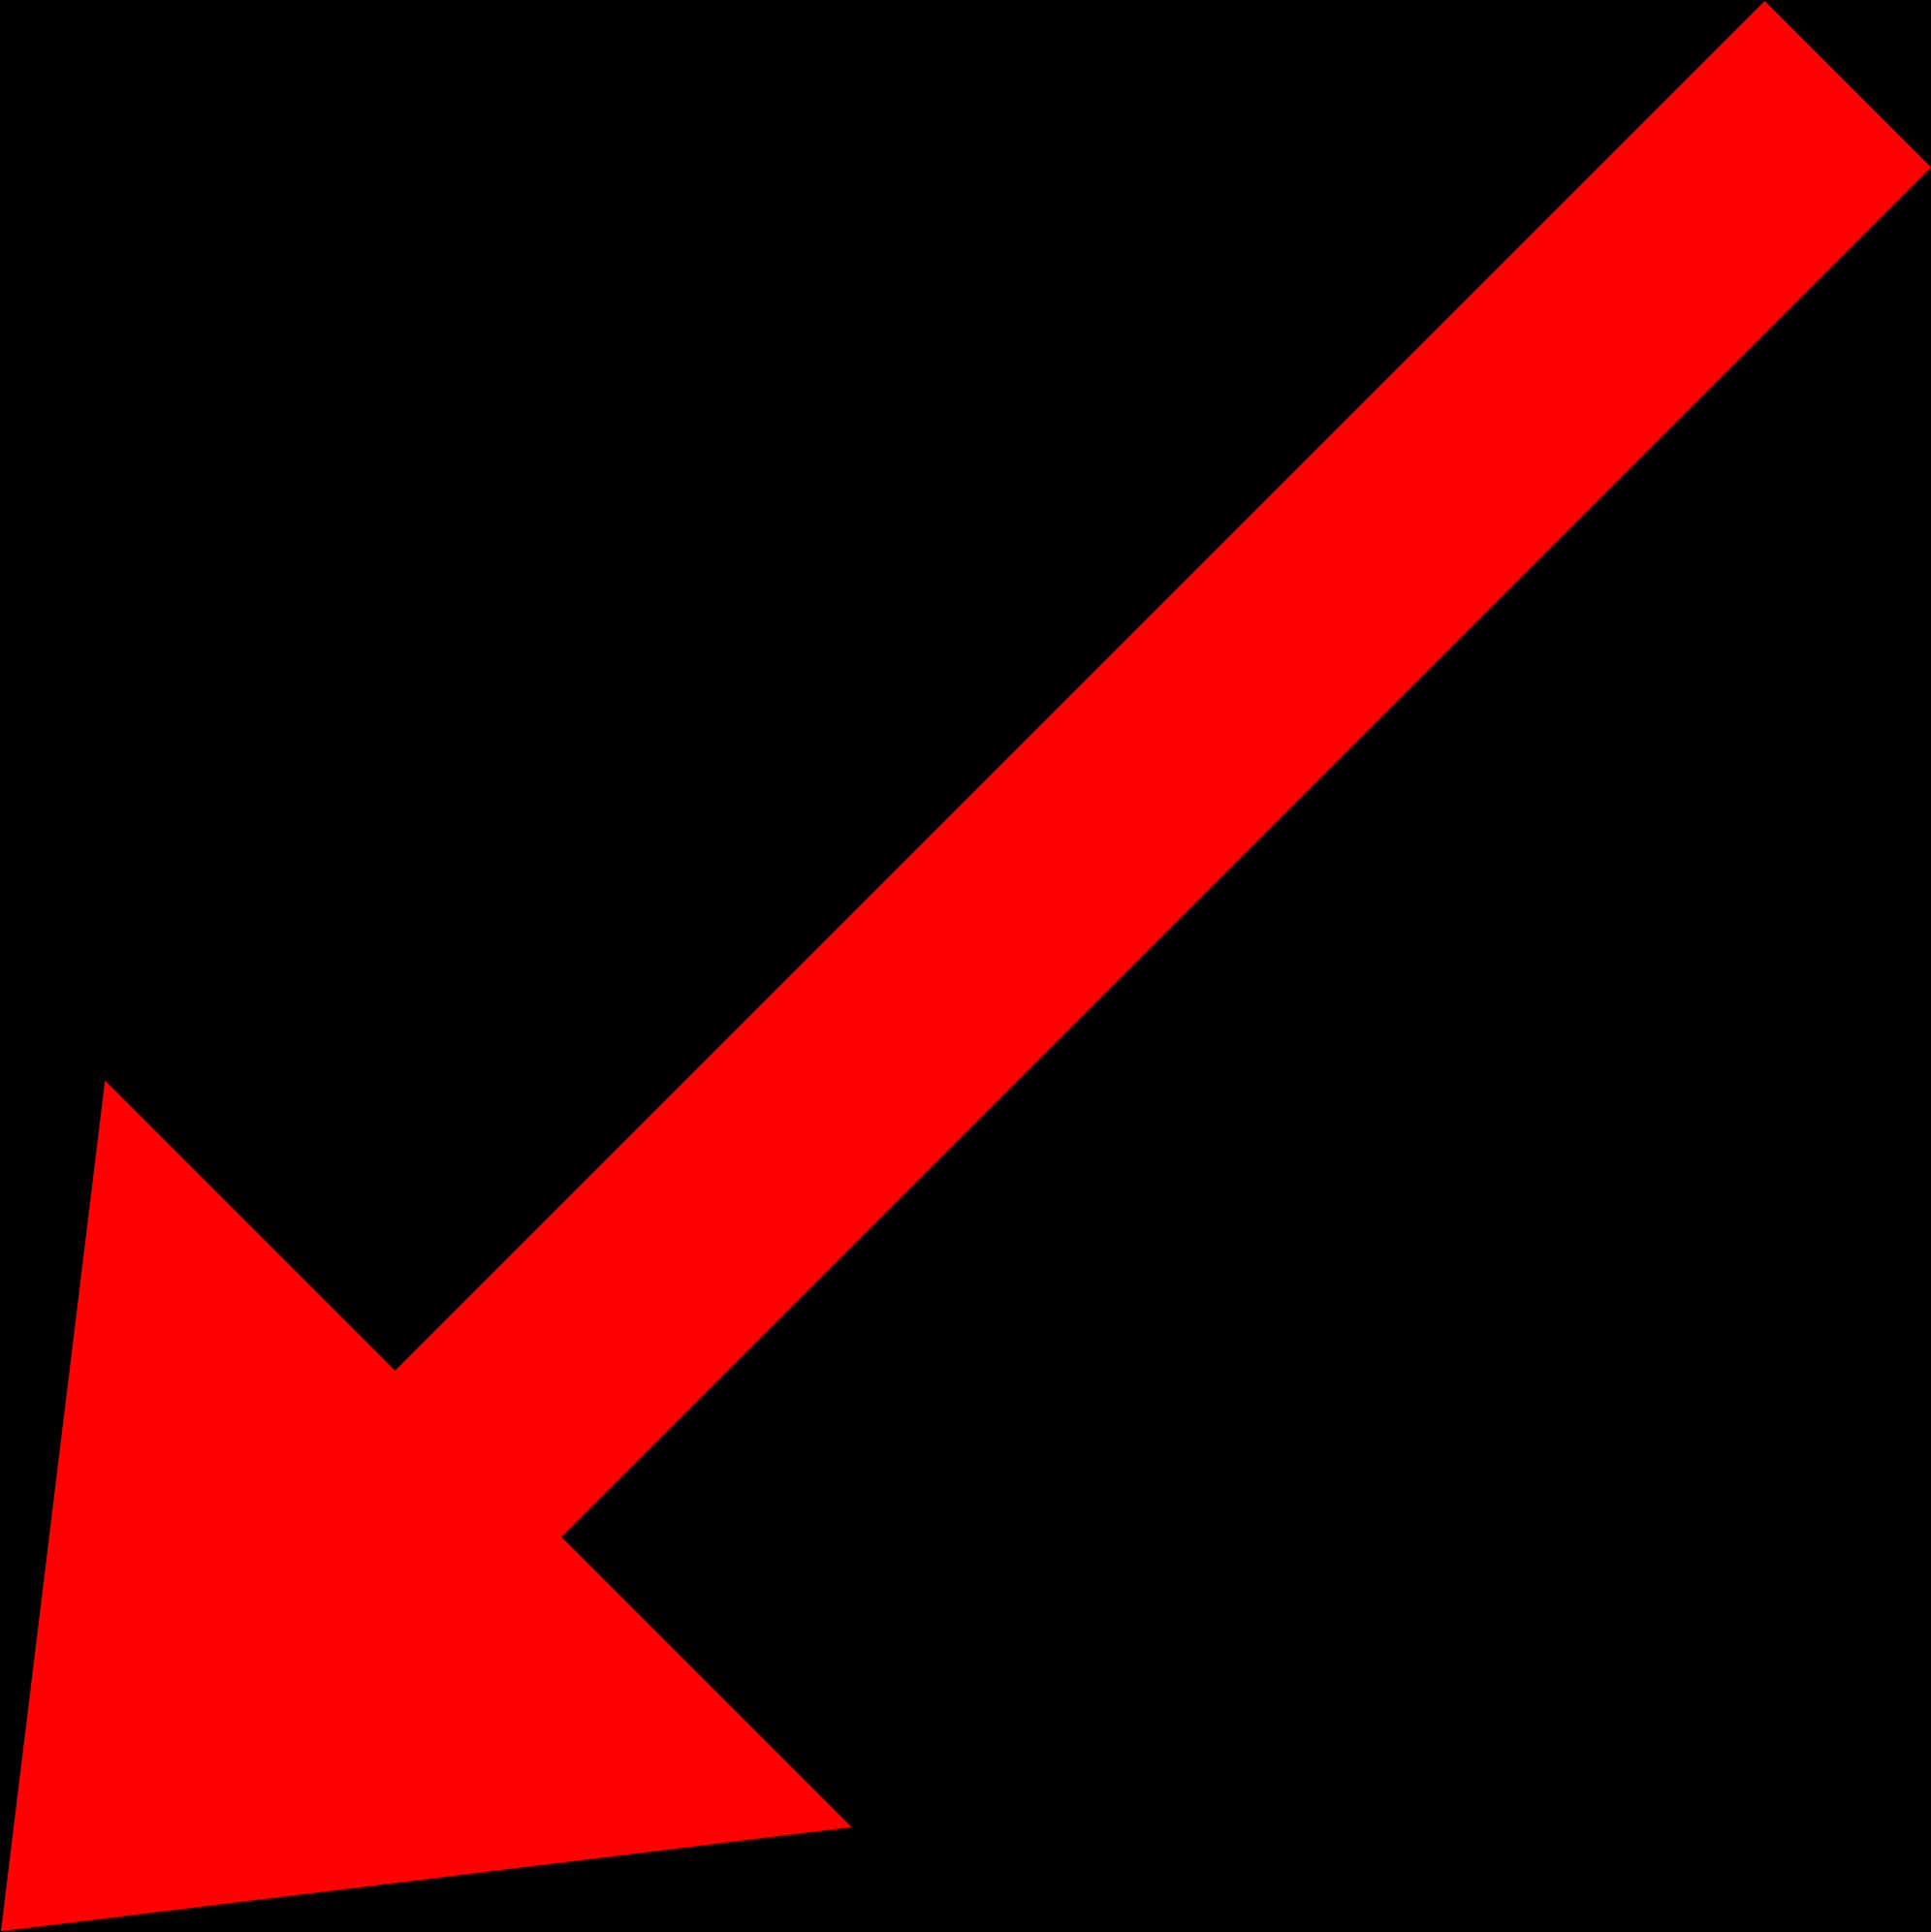 Red Arrow Graphic Icon